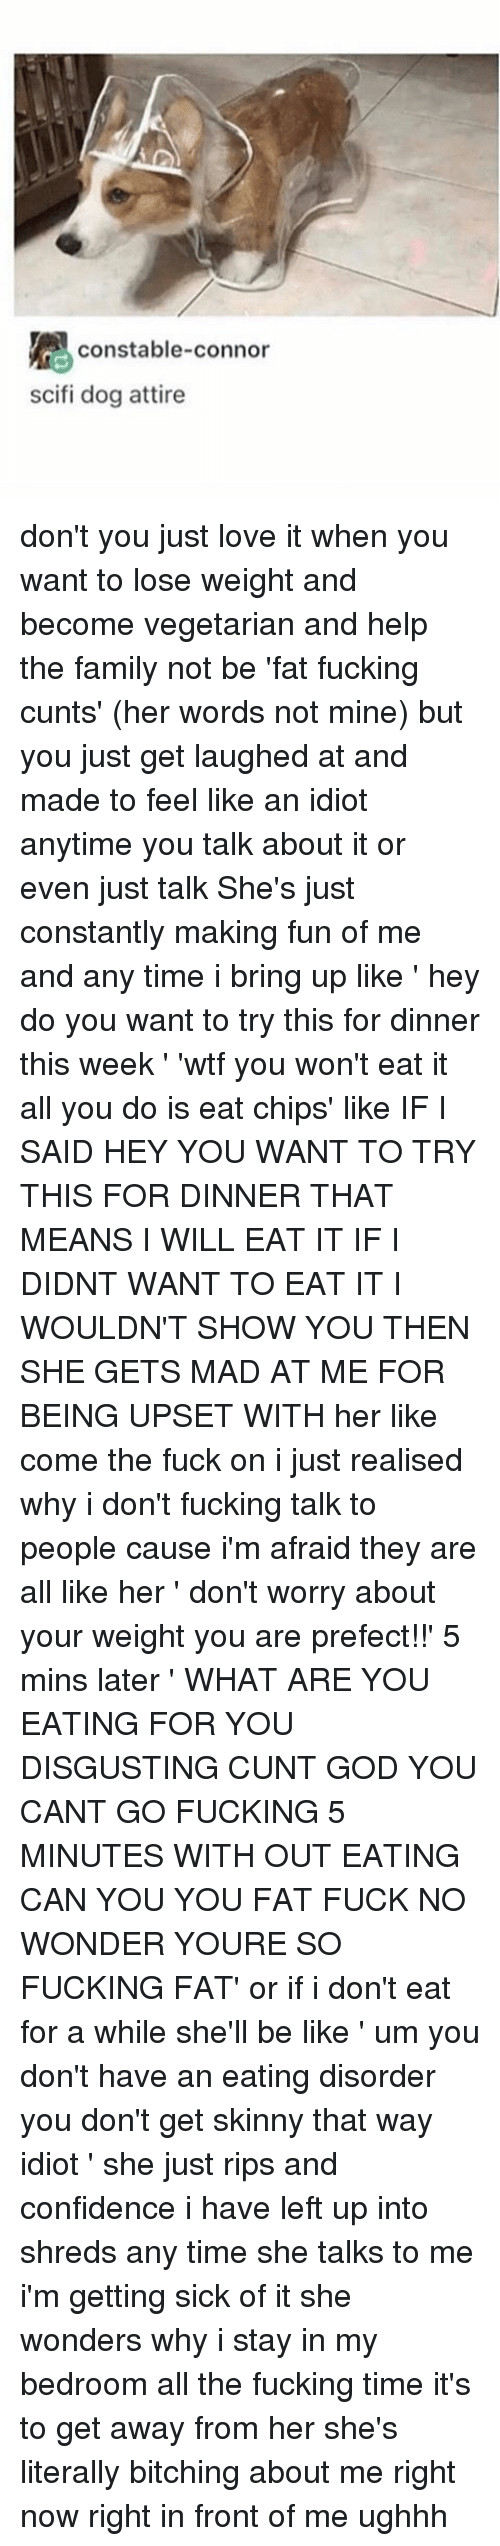 What The Fuck Should I Have For Dinner
 25 Best Memes About Eating Disorders